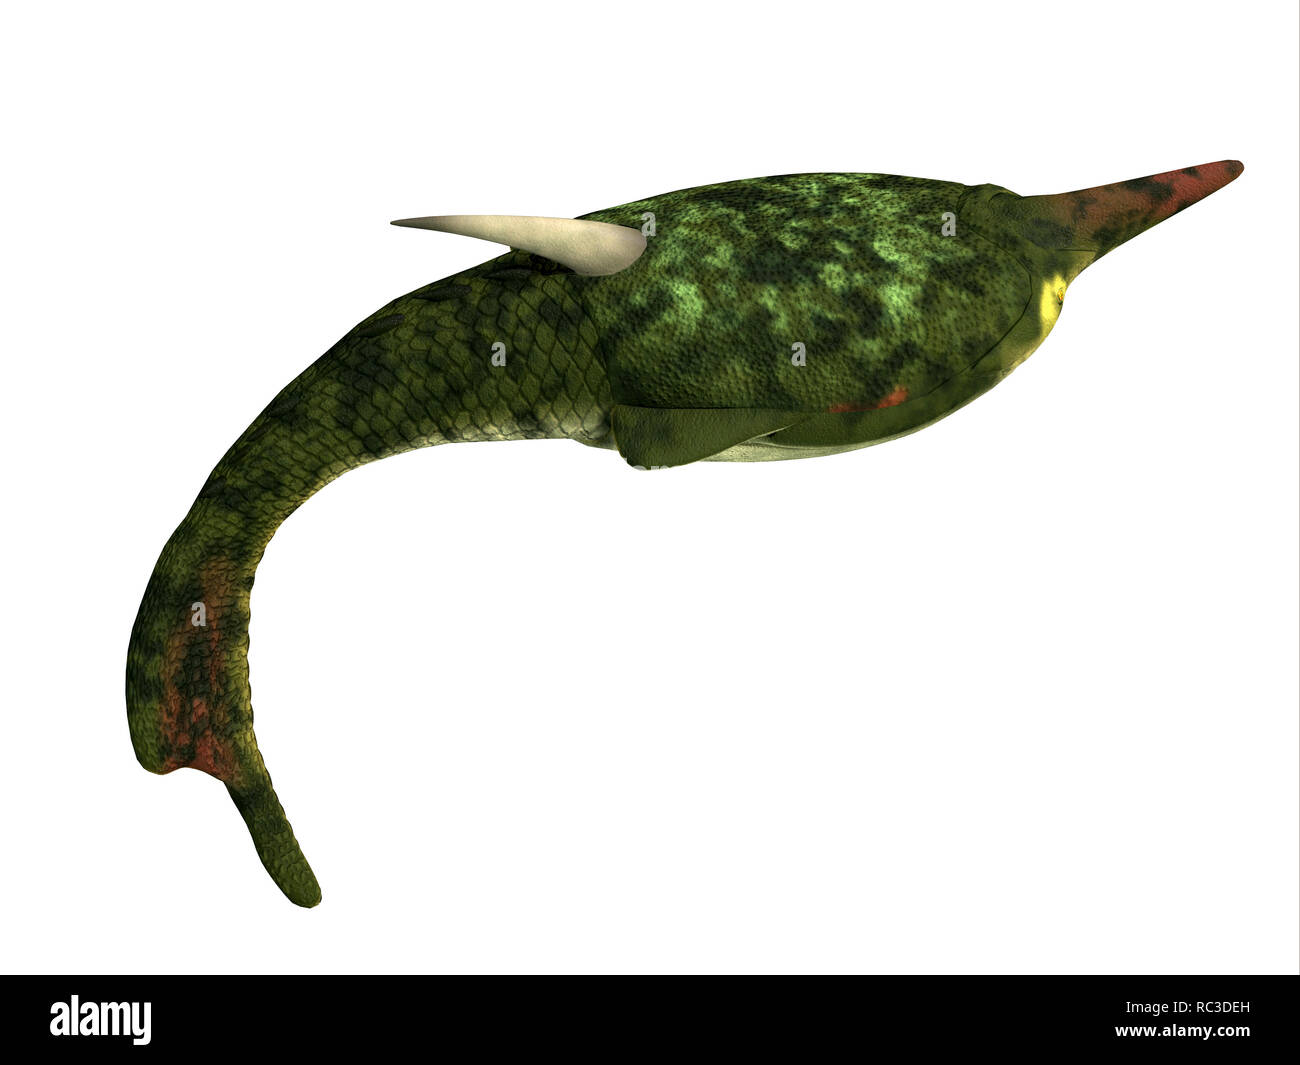 Pteraspis Fish Side Profile - Pteraspis was a primitive jawless fish that lived in the oceans of the Devonian Period. Stock Photo